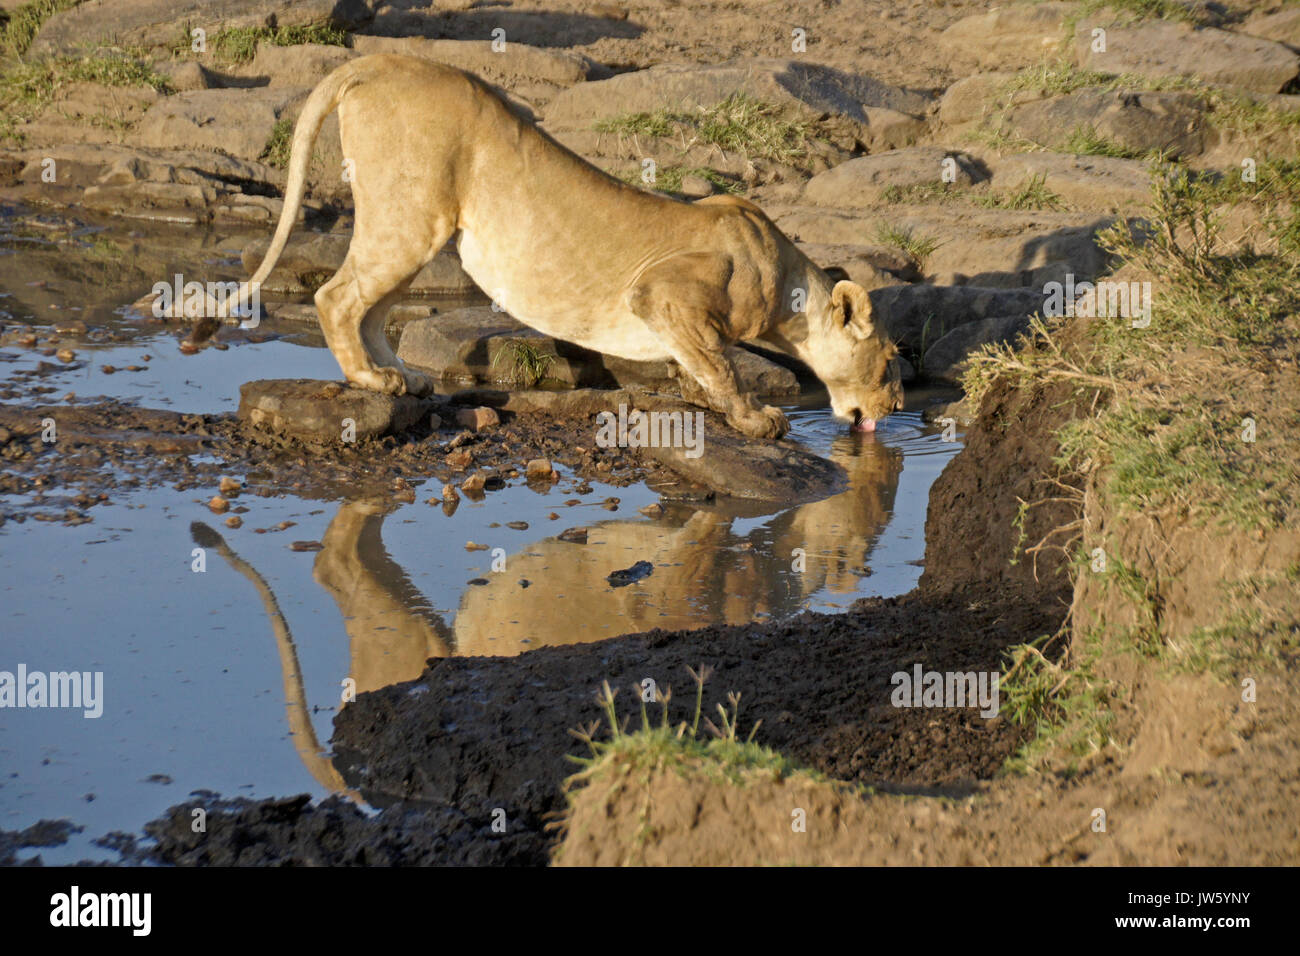 Lioness drinking at pool of water in rocky area, Masai Mara Game Reserve, Kenya Stock Photo